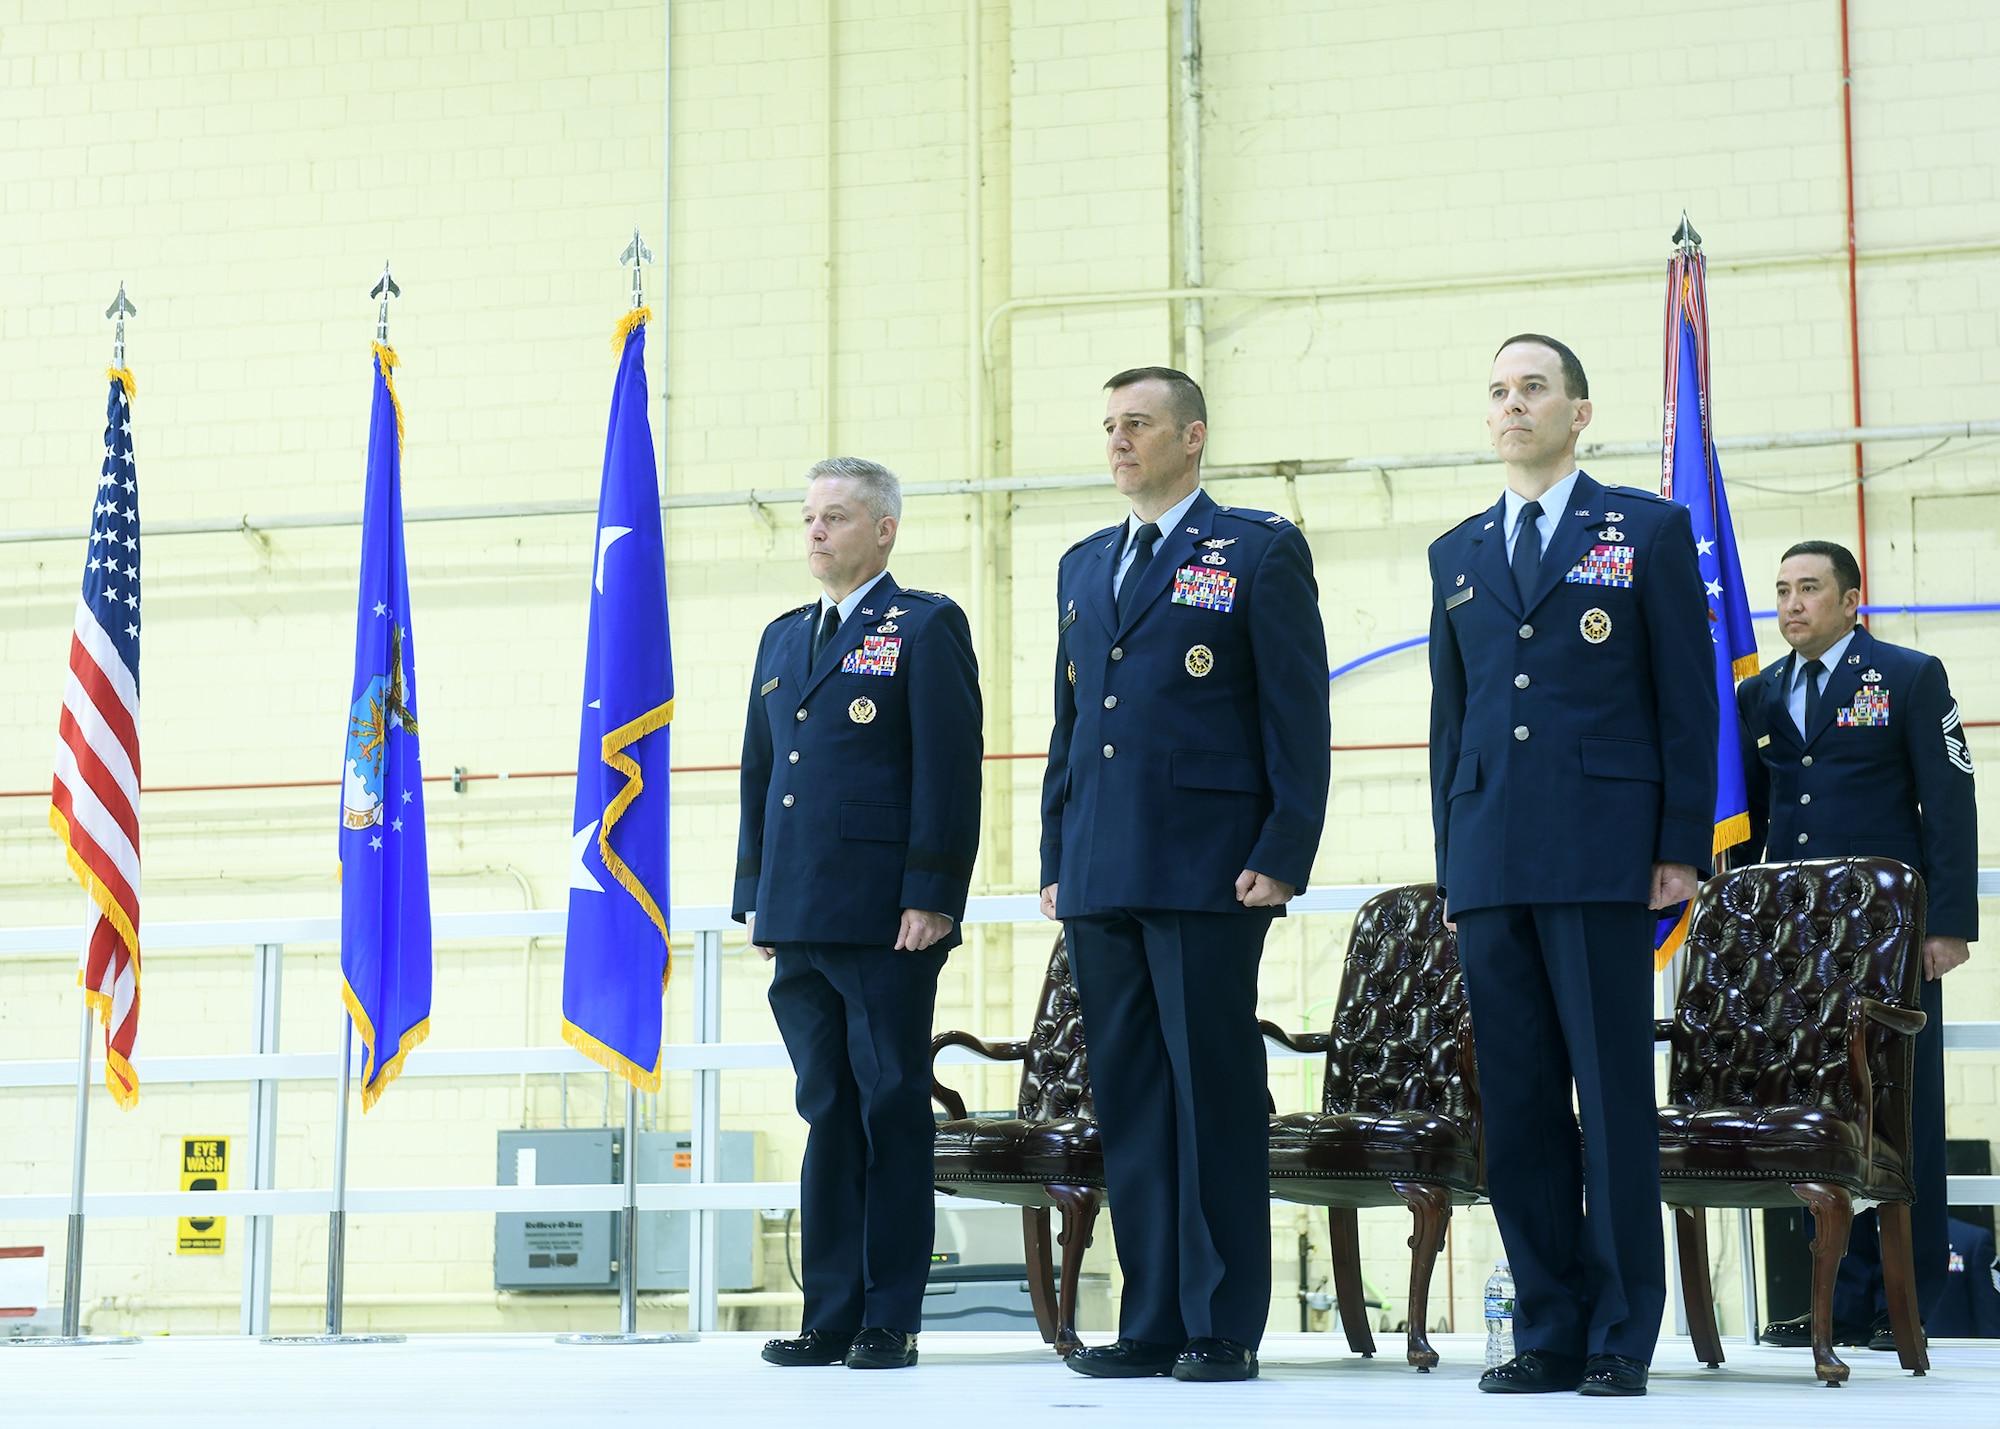 (L to R) Lt. Gen. Timothy Haugh, Sixteenth Air Force (Air Forces Cyber) commander, Col. Patrick Williams, outgoing 557th Weather Wing commander and Col. Bradley Stebbins, incoming 557 WW commander, Stand at attention as the colors are being flown and National Anthem is being performed on May 24, 2022 in hangar six on Offutt AFB.